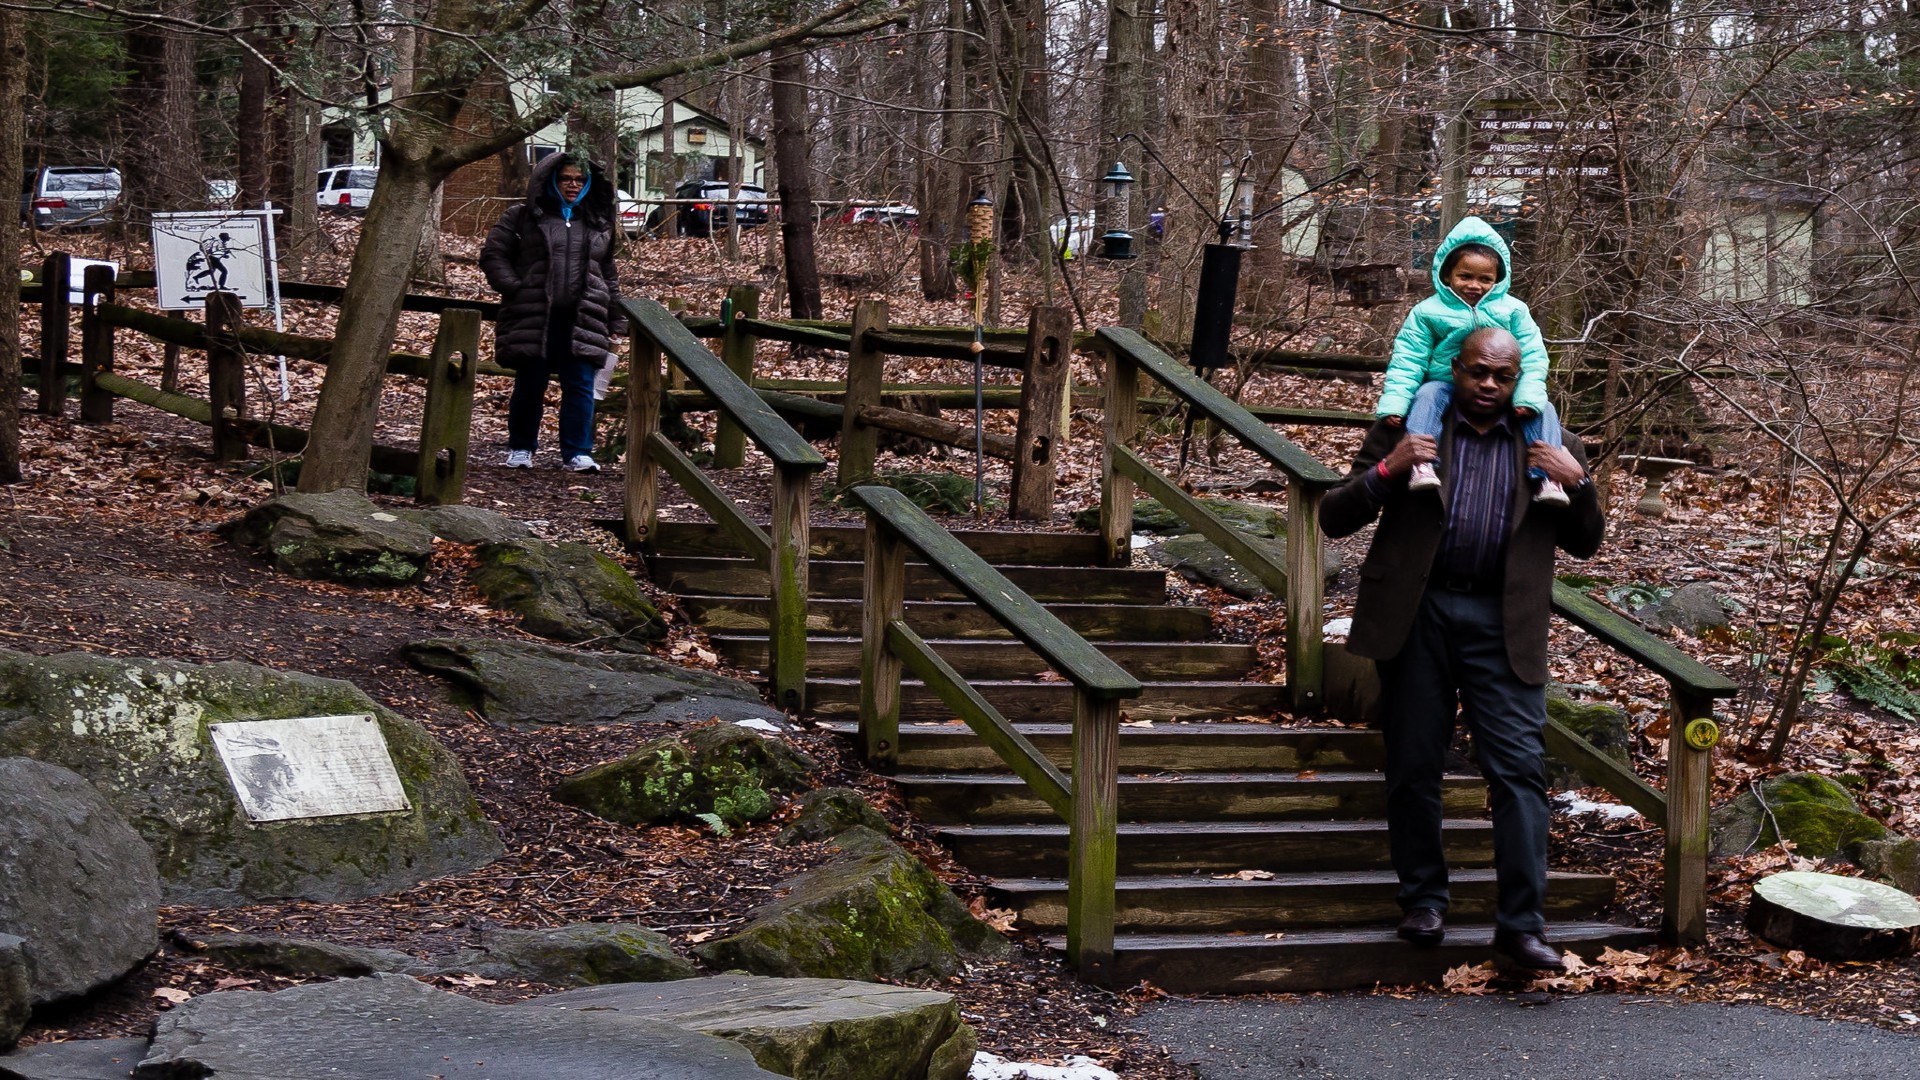 A family descends a staircase coming from a trail walk